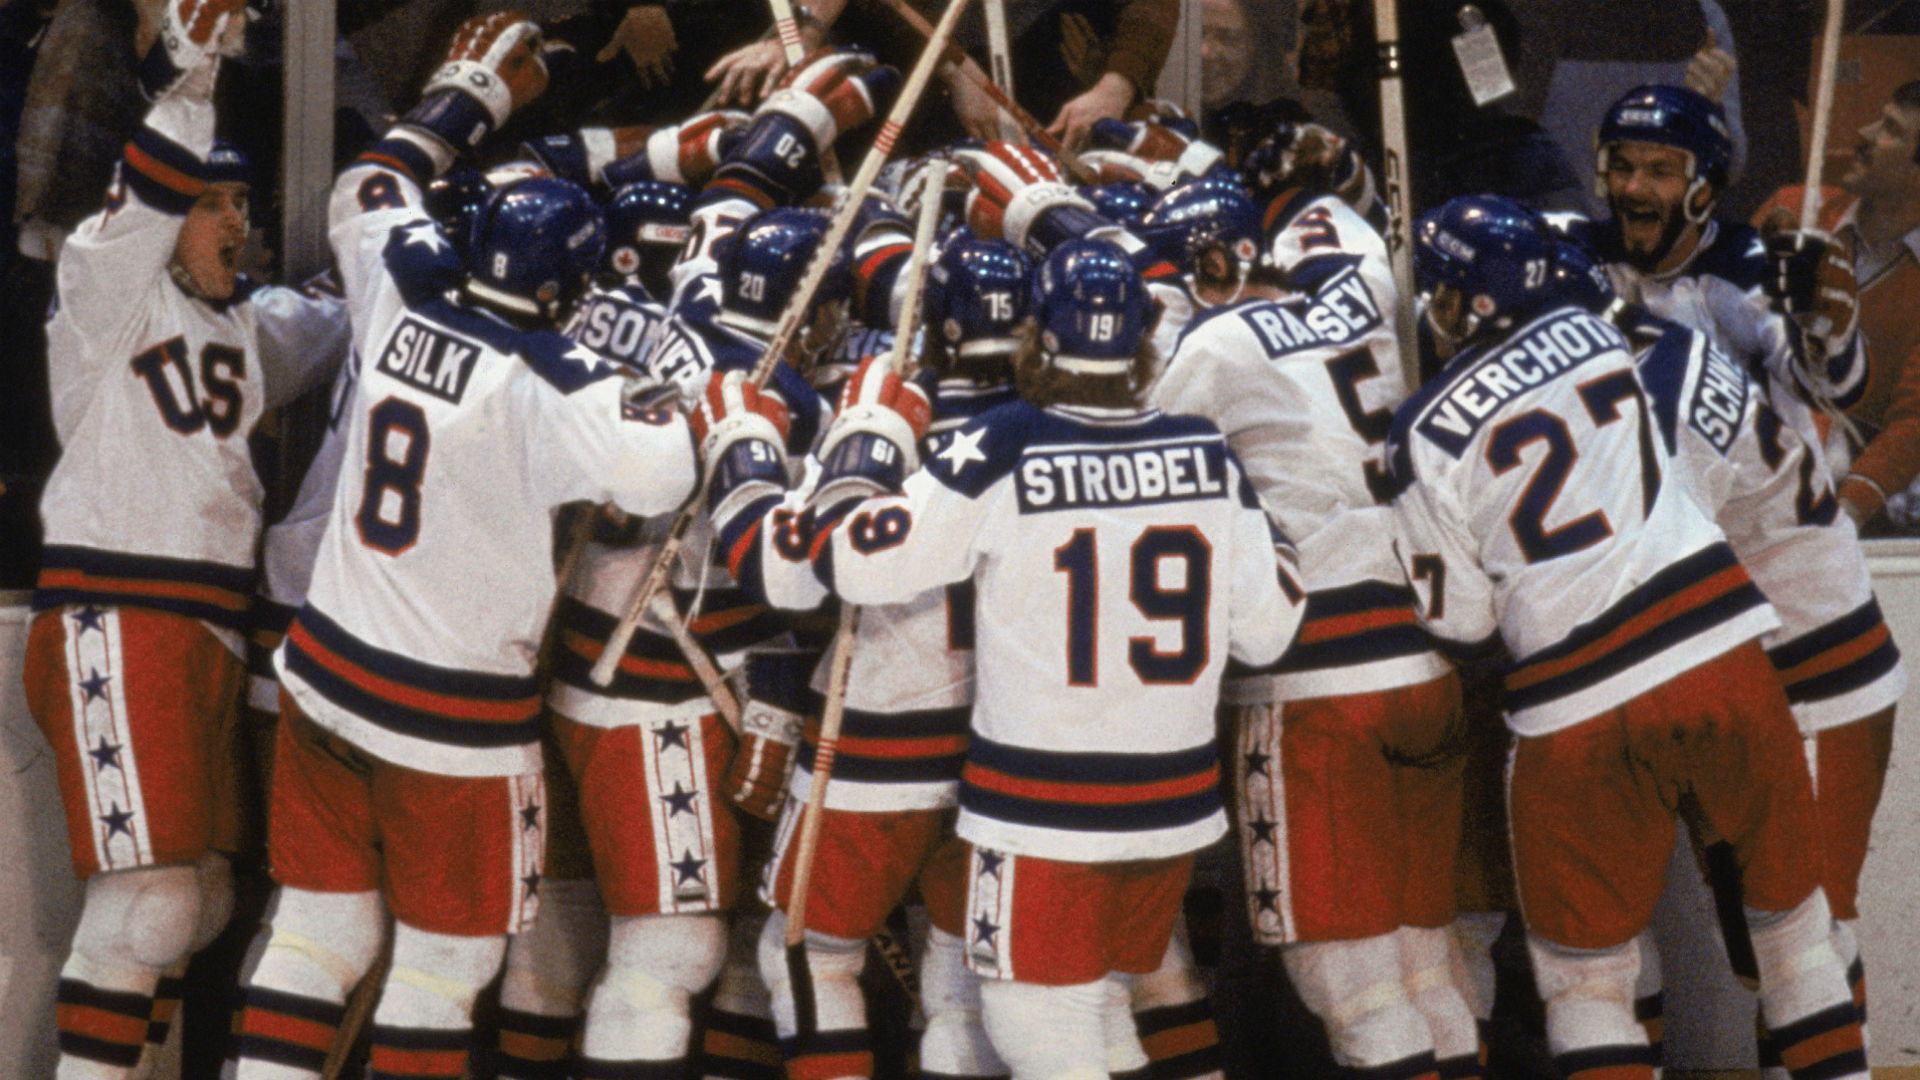 miracle-on-ice-022215-usnews-getty-ftr_9